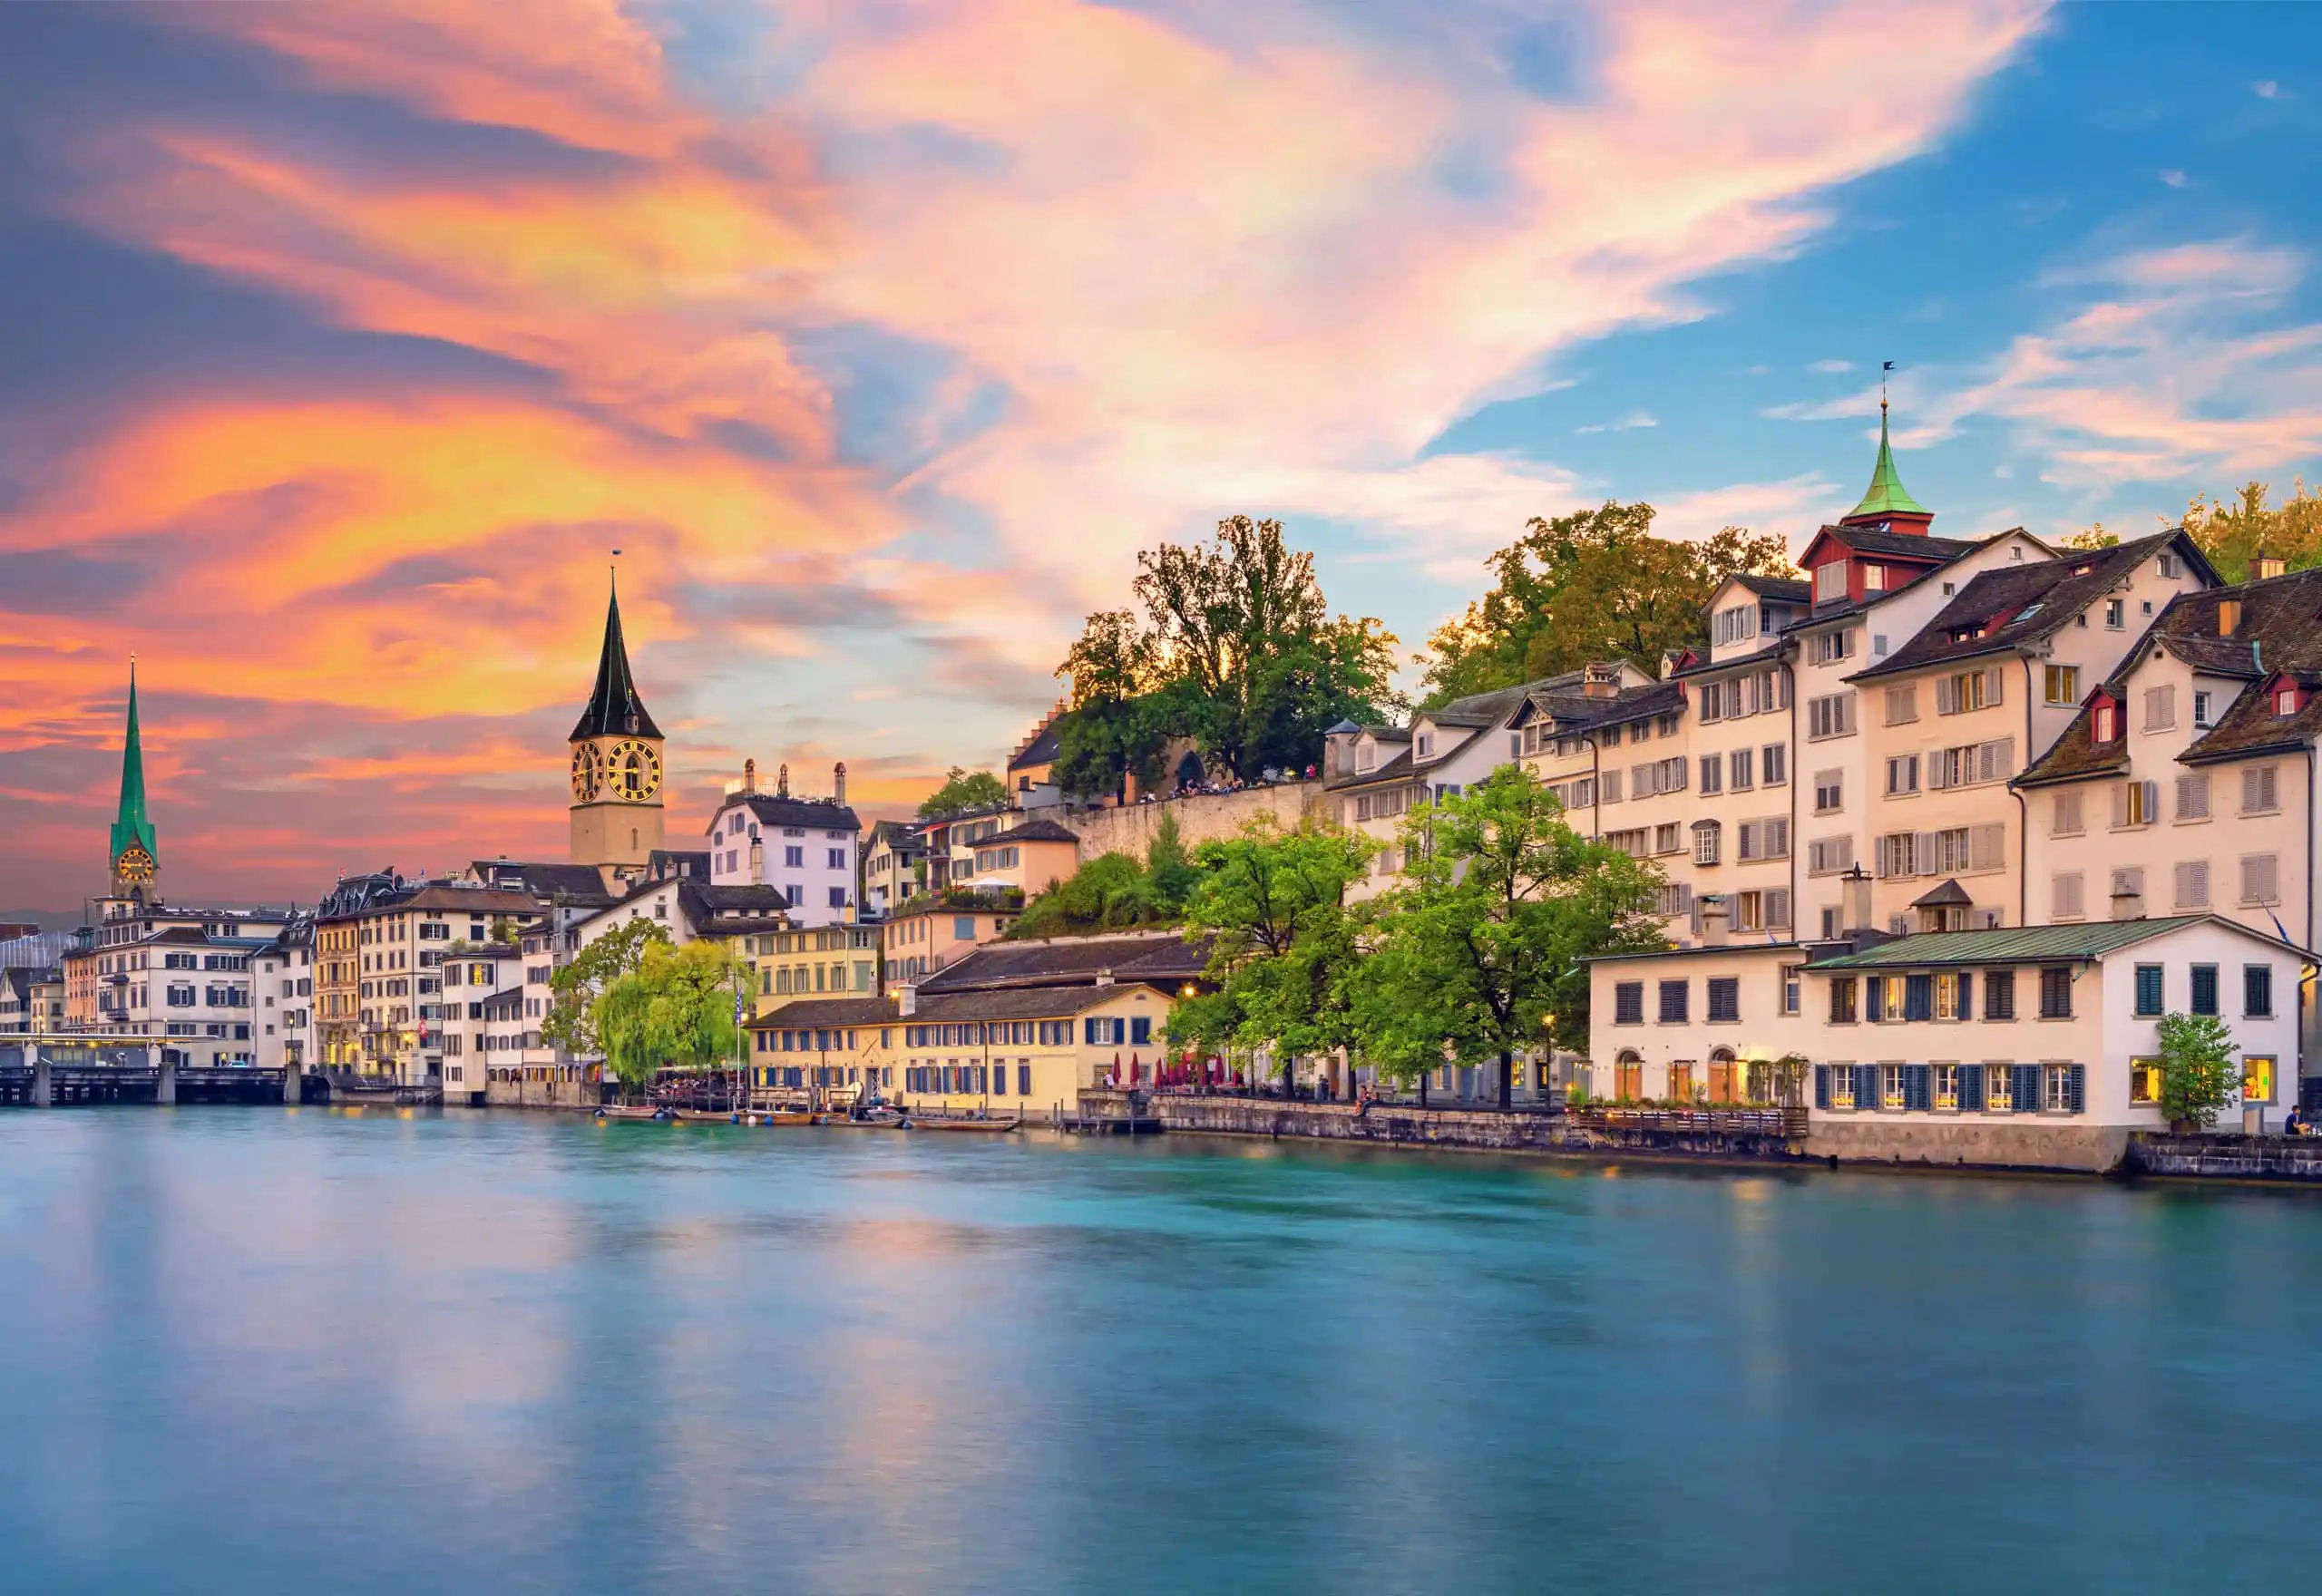 Construction and Civil Engineering Training Courses in Zurich